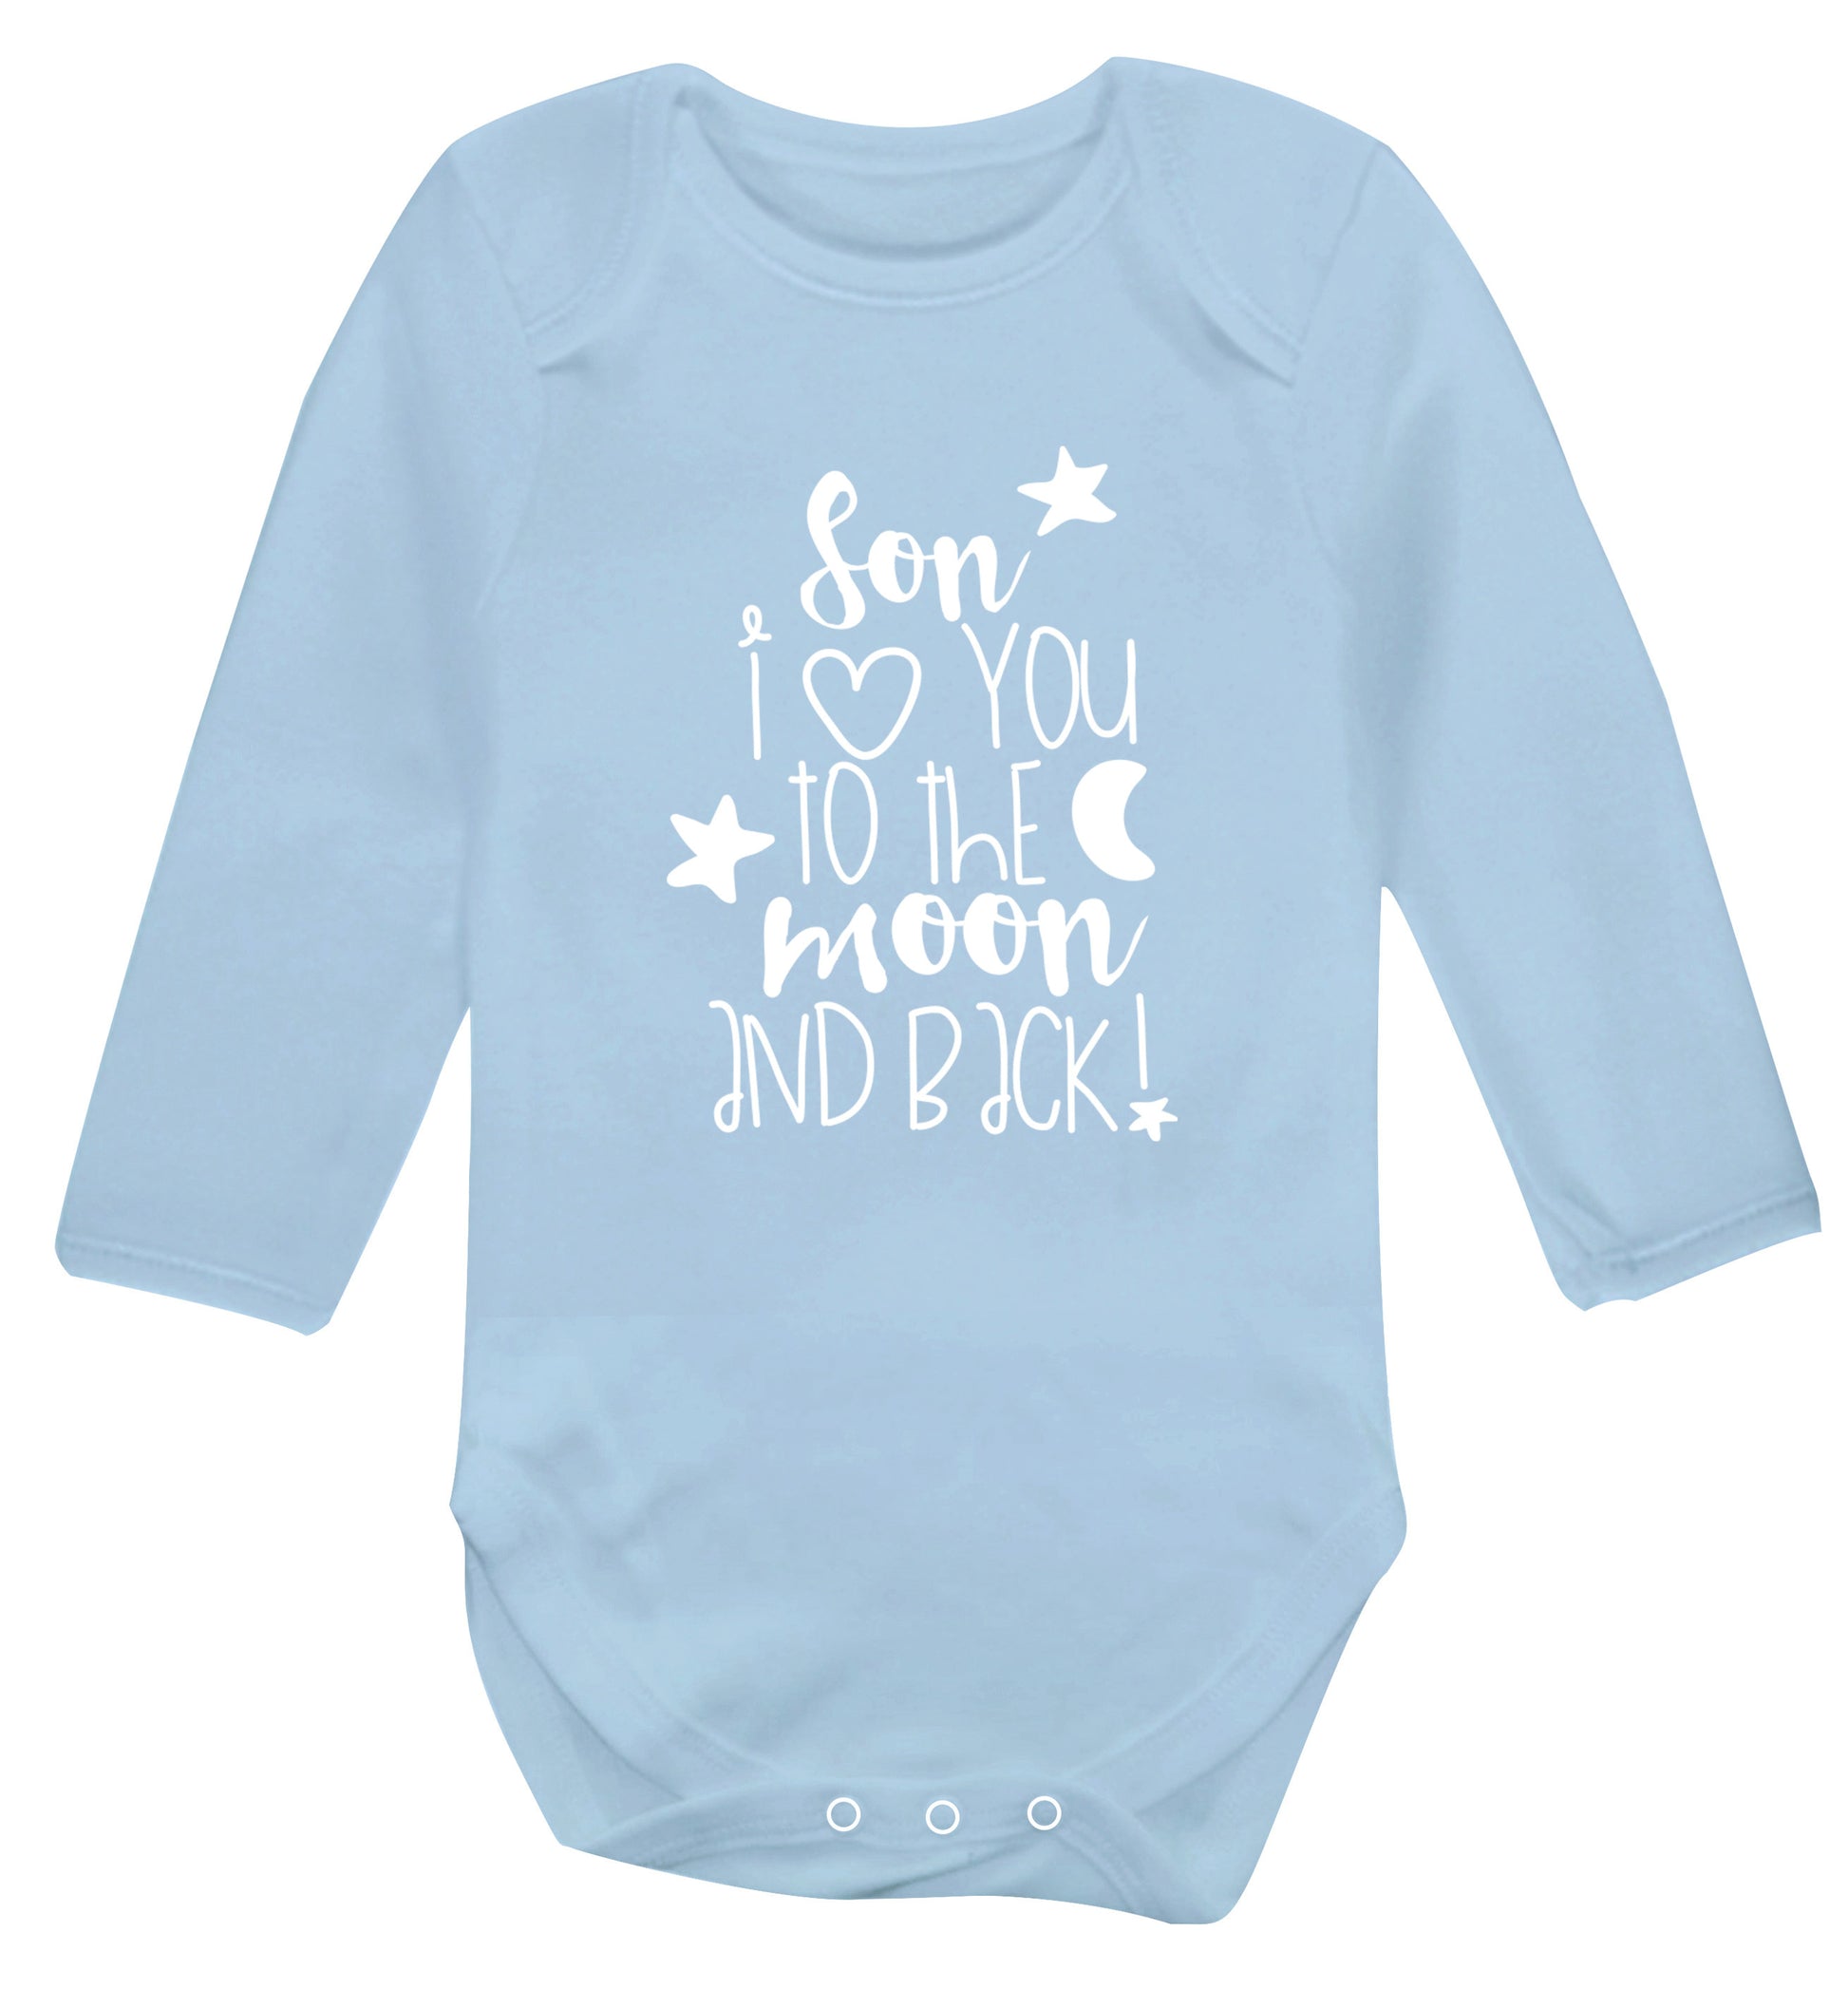 Son I love you to the moon and back Baby Vest long sleeved pale blue 6-12 months